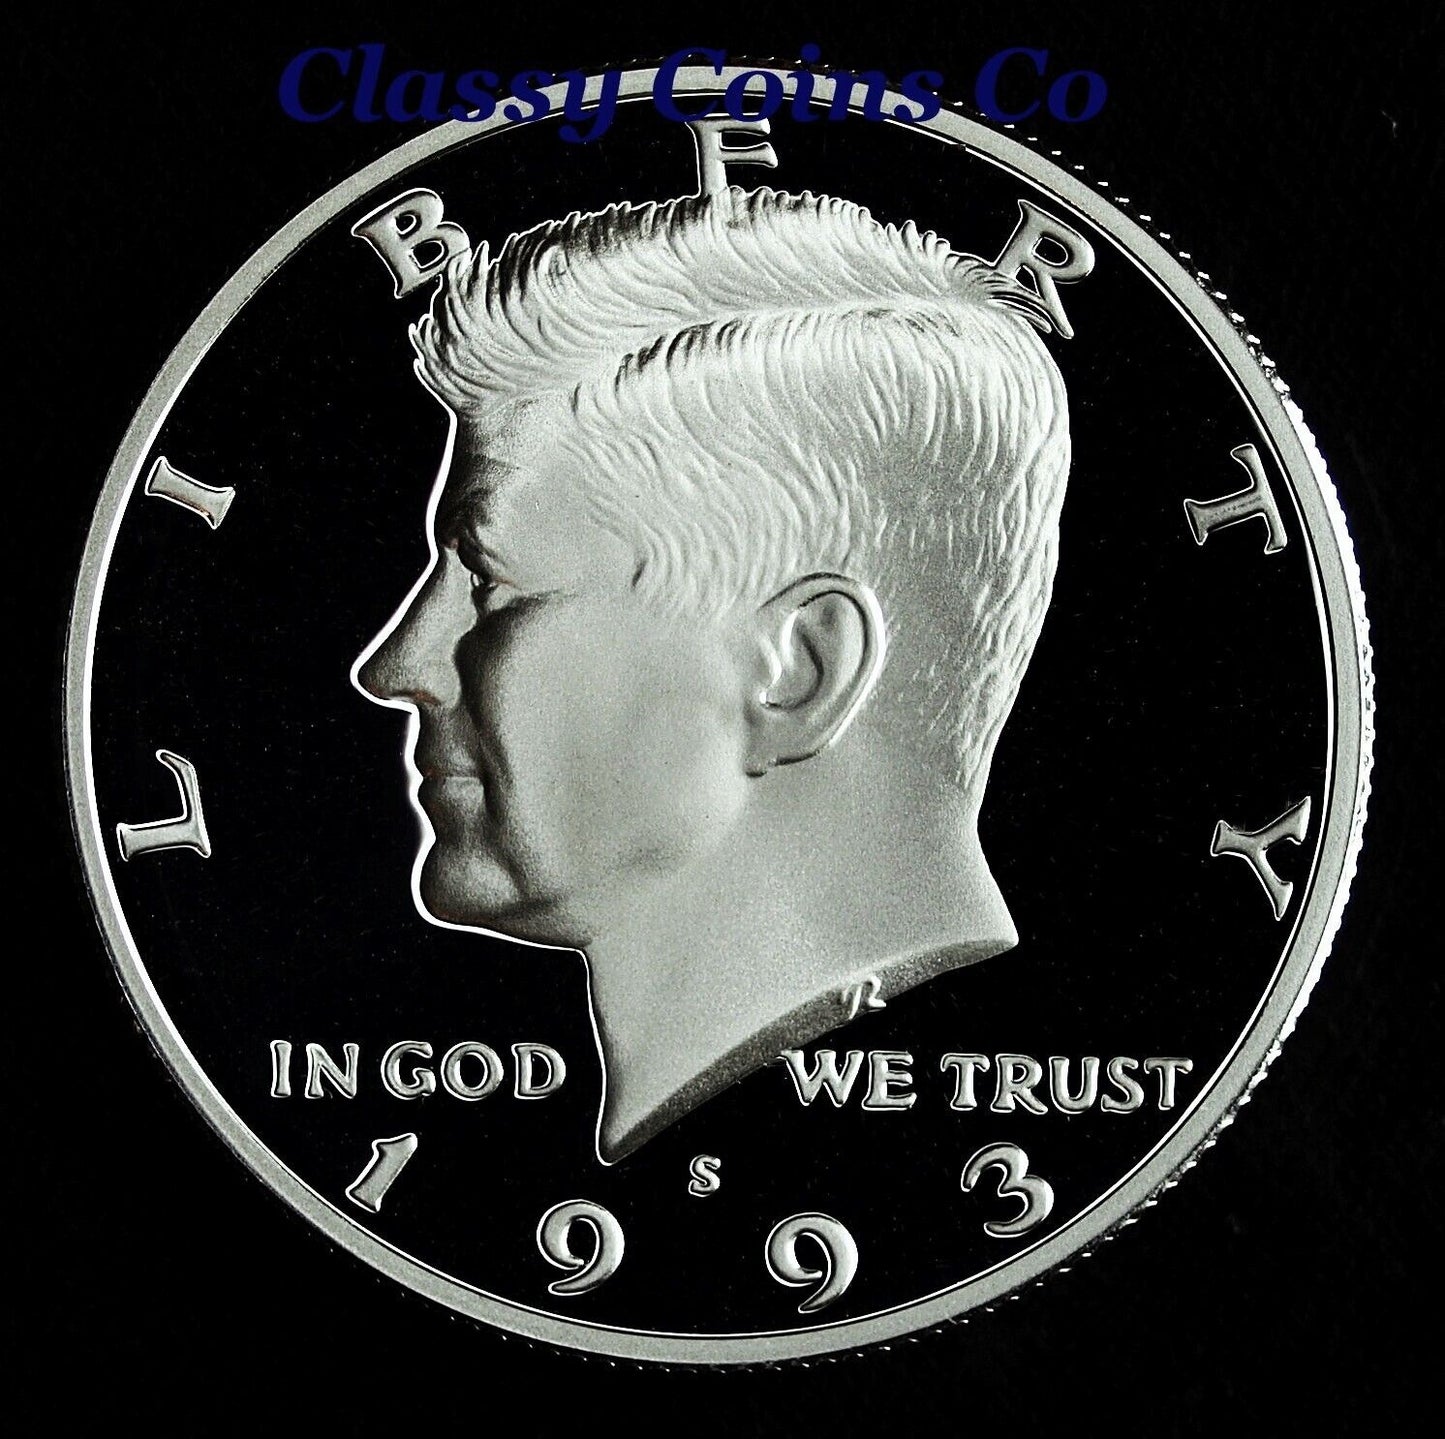 1993 S Silver Proof Kennedy Half Dollar ☆☆ Great For Sets ☆☆ From Proof Set